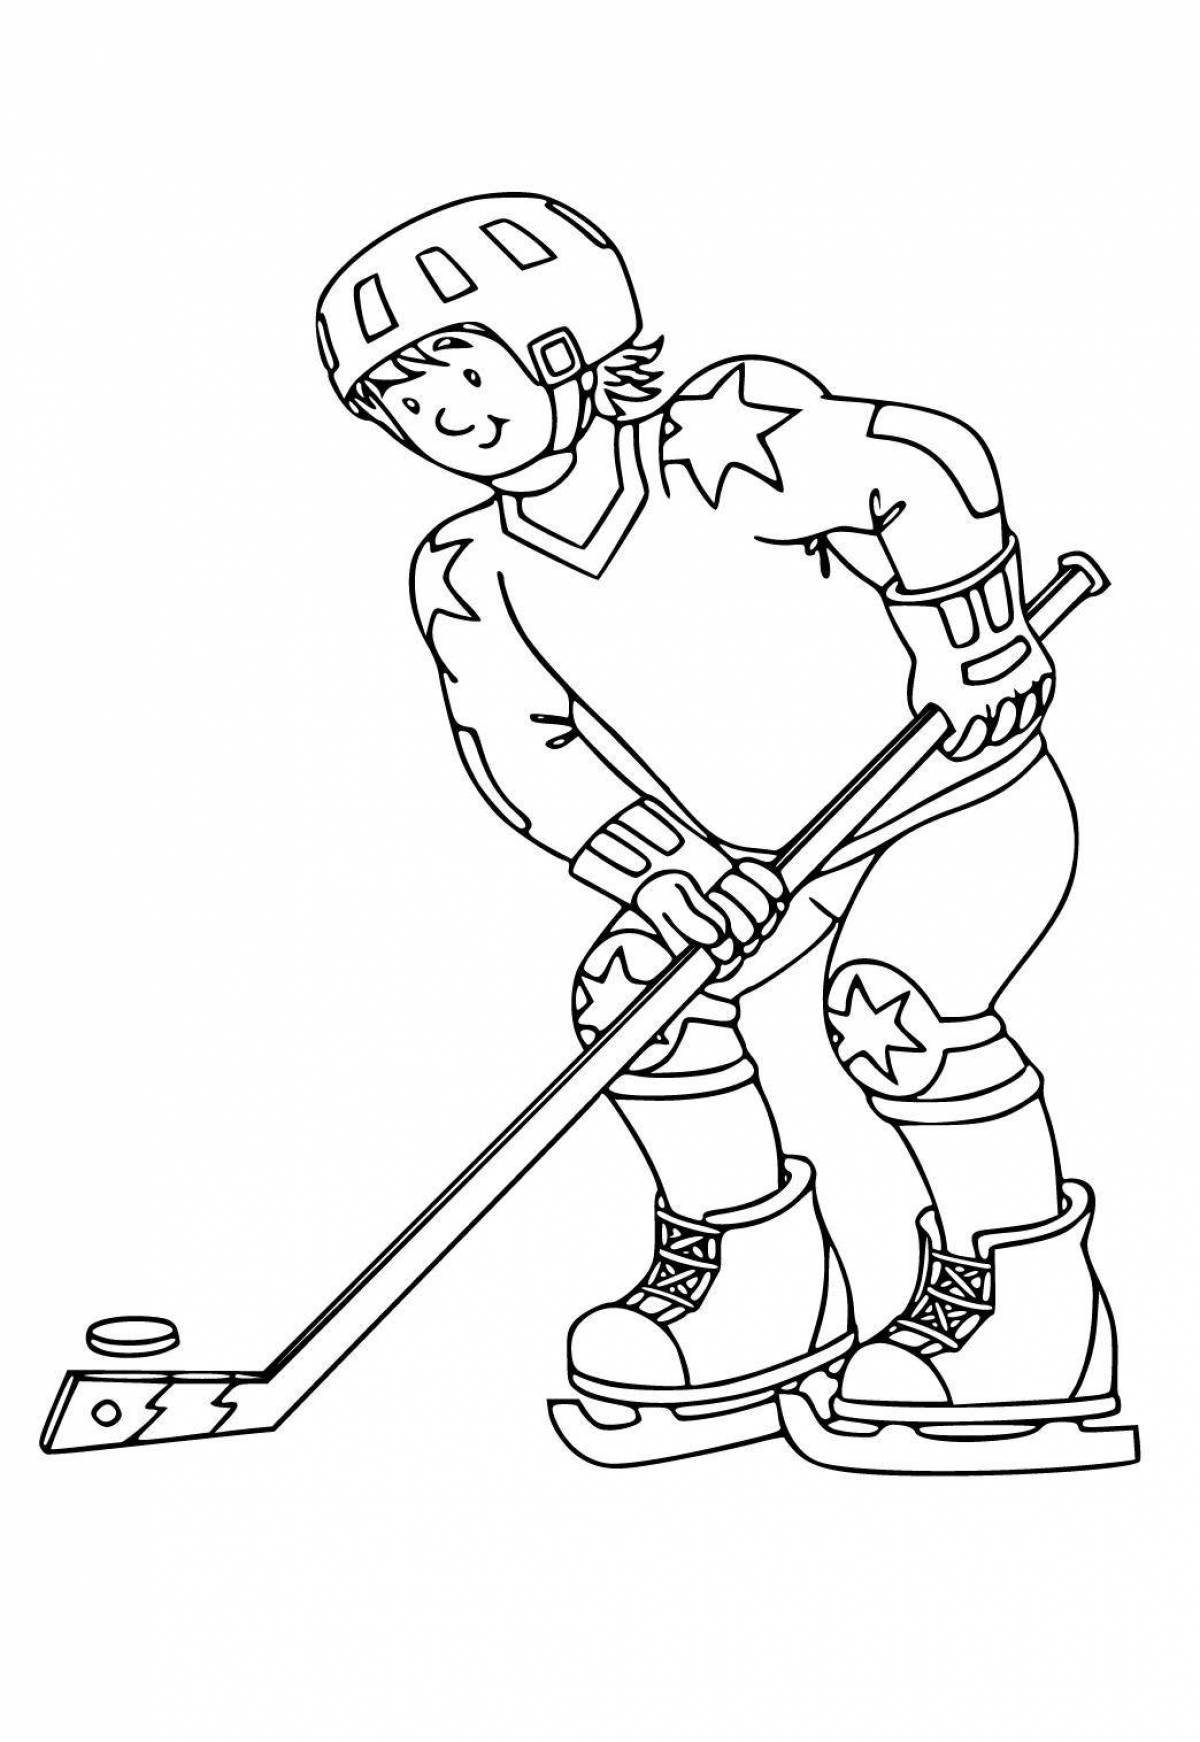 Adorable hockey coloring book for kids